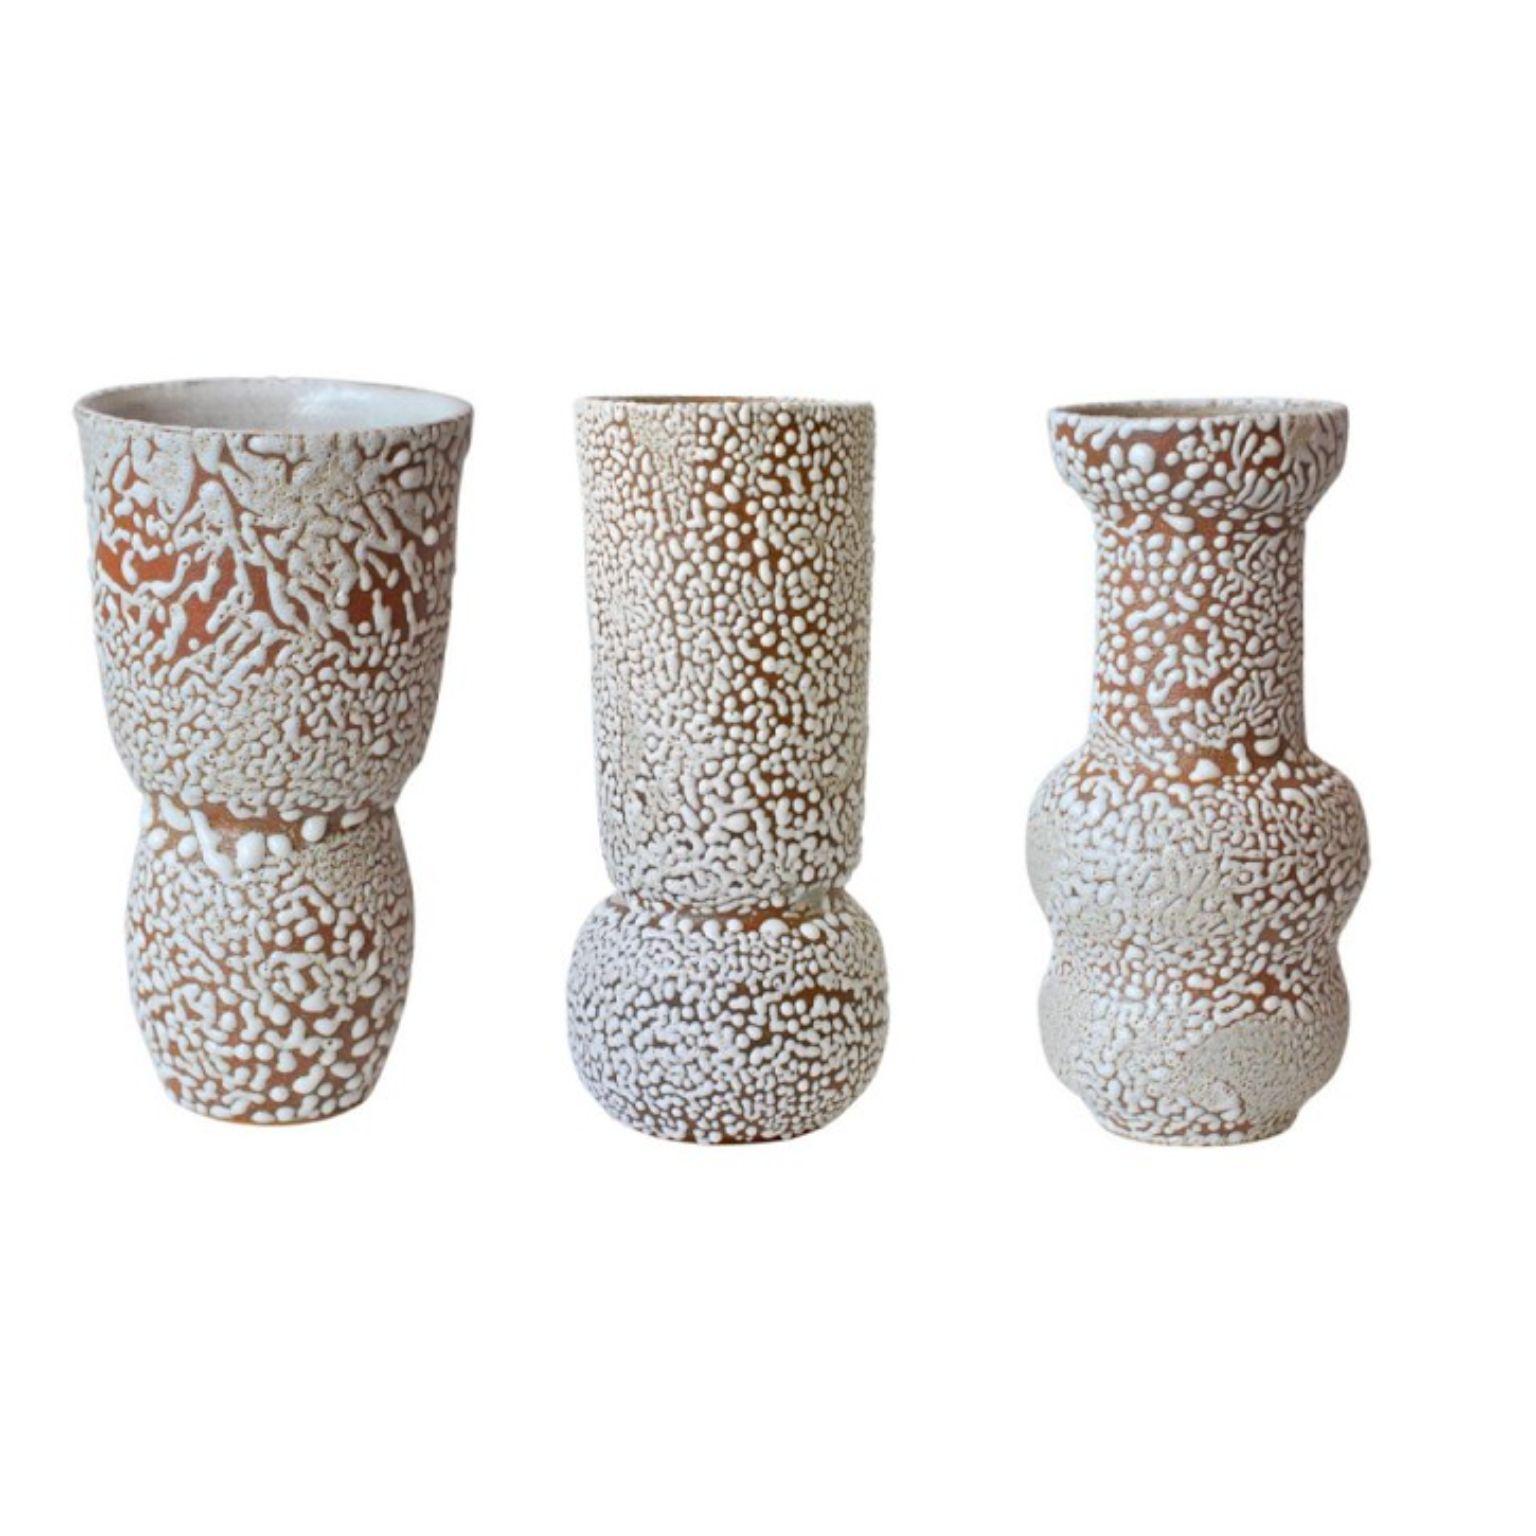 Set of 3 white stoneware vases C-019, C0-15, C-018 by Moïo Studio
Dimensions: D14 x W14 x H30 cm
Materials: White crawl glaze on tan stoneware
Made by hand on the wheel
Unique piece, consult for multiples

Is the Berlin-based ceramic art